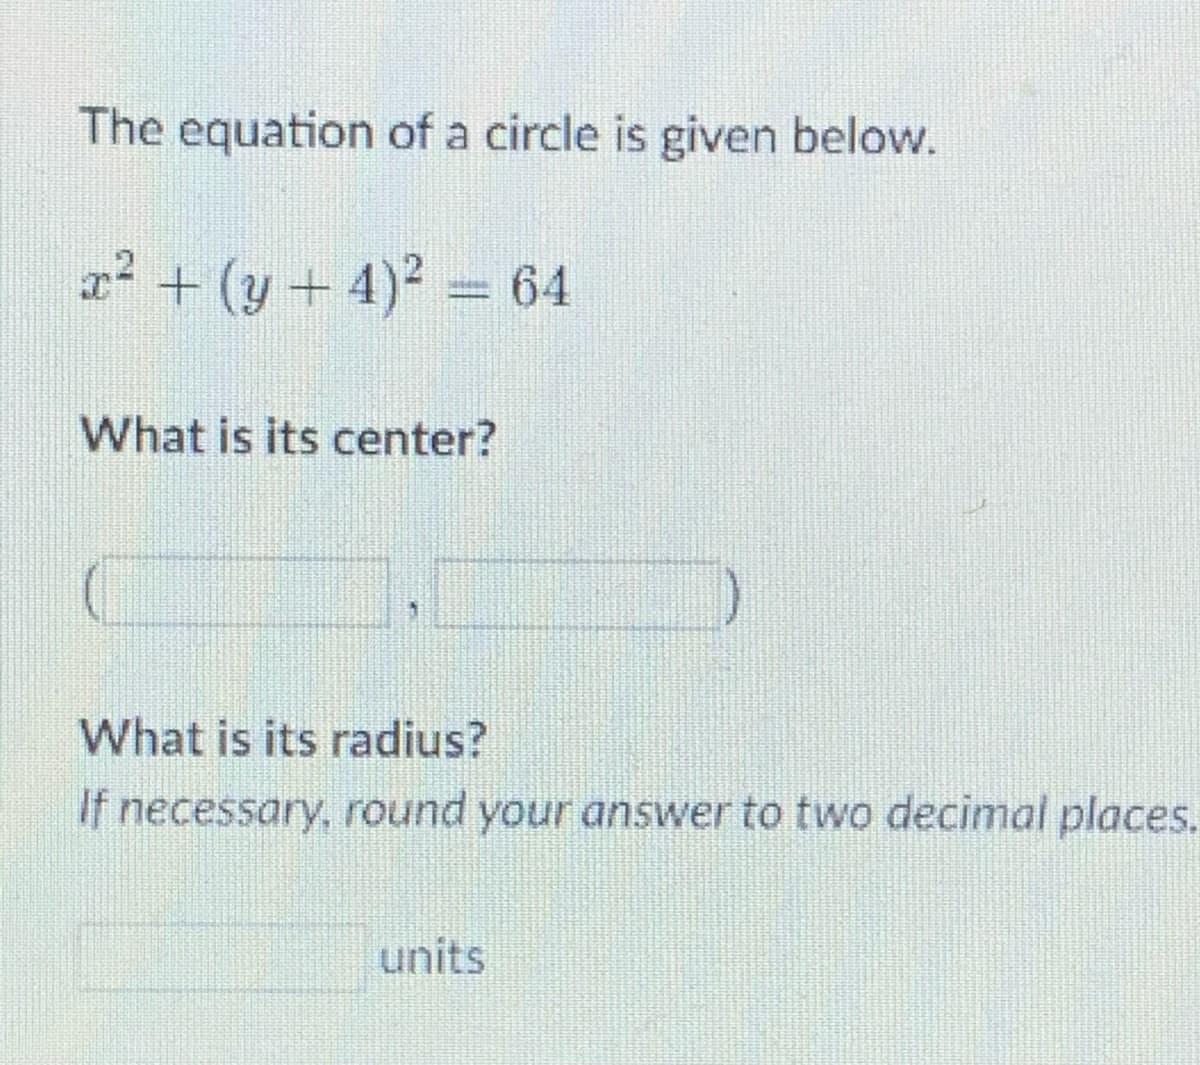 The equation of a circle is given below.
r? + (y+ 4)2 = 64
What is its center?
What is its radius?
If necessary, round your answer to two decimal places.
units
